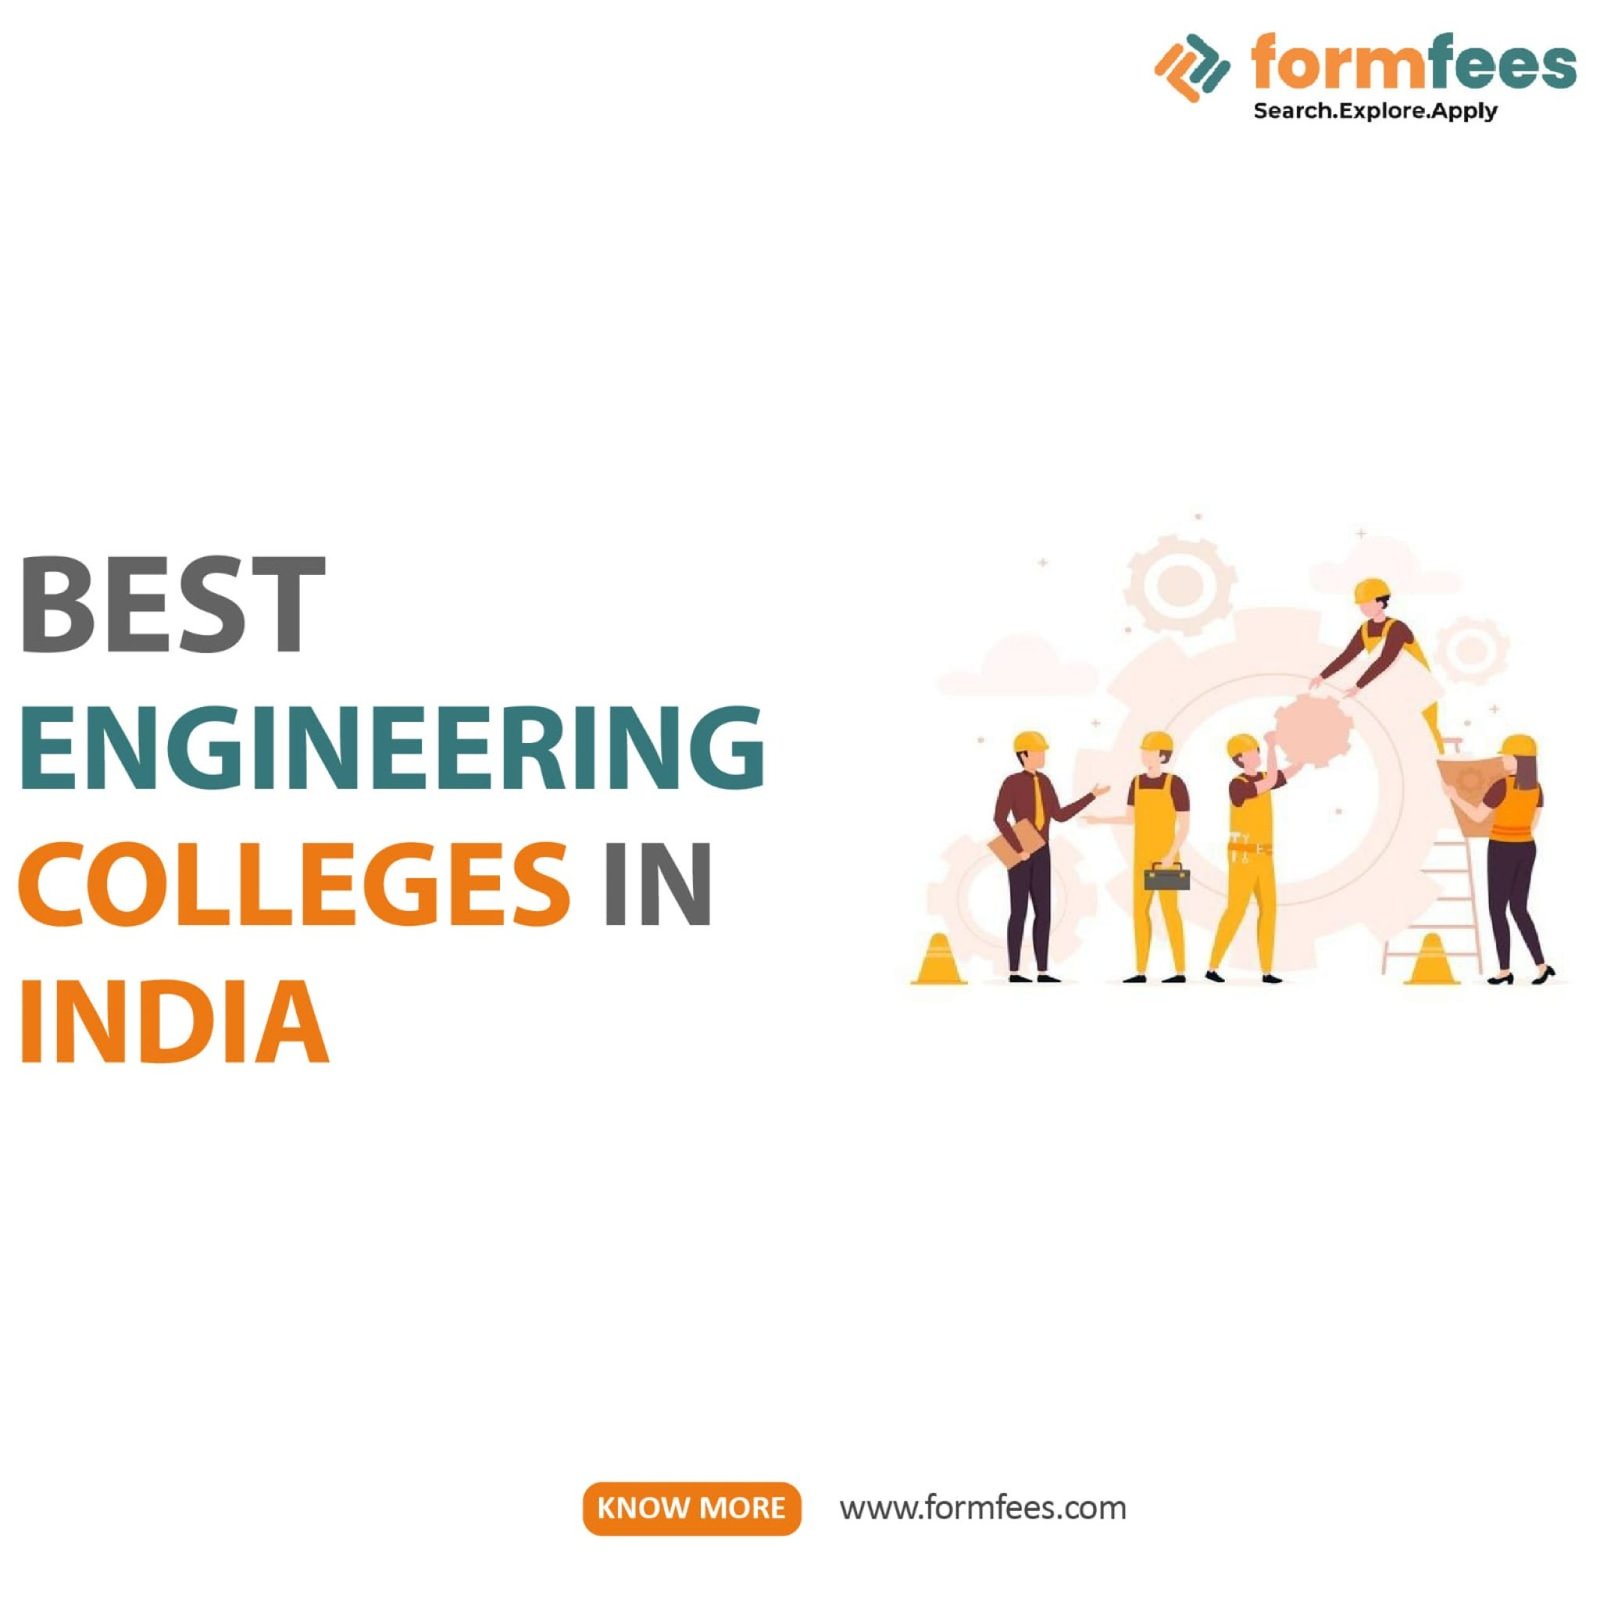 Best Engineering Colleges in India Formfees